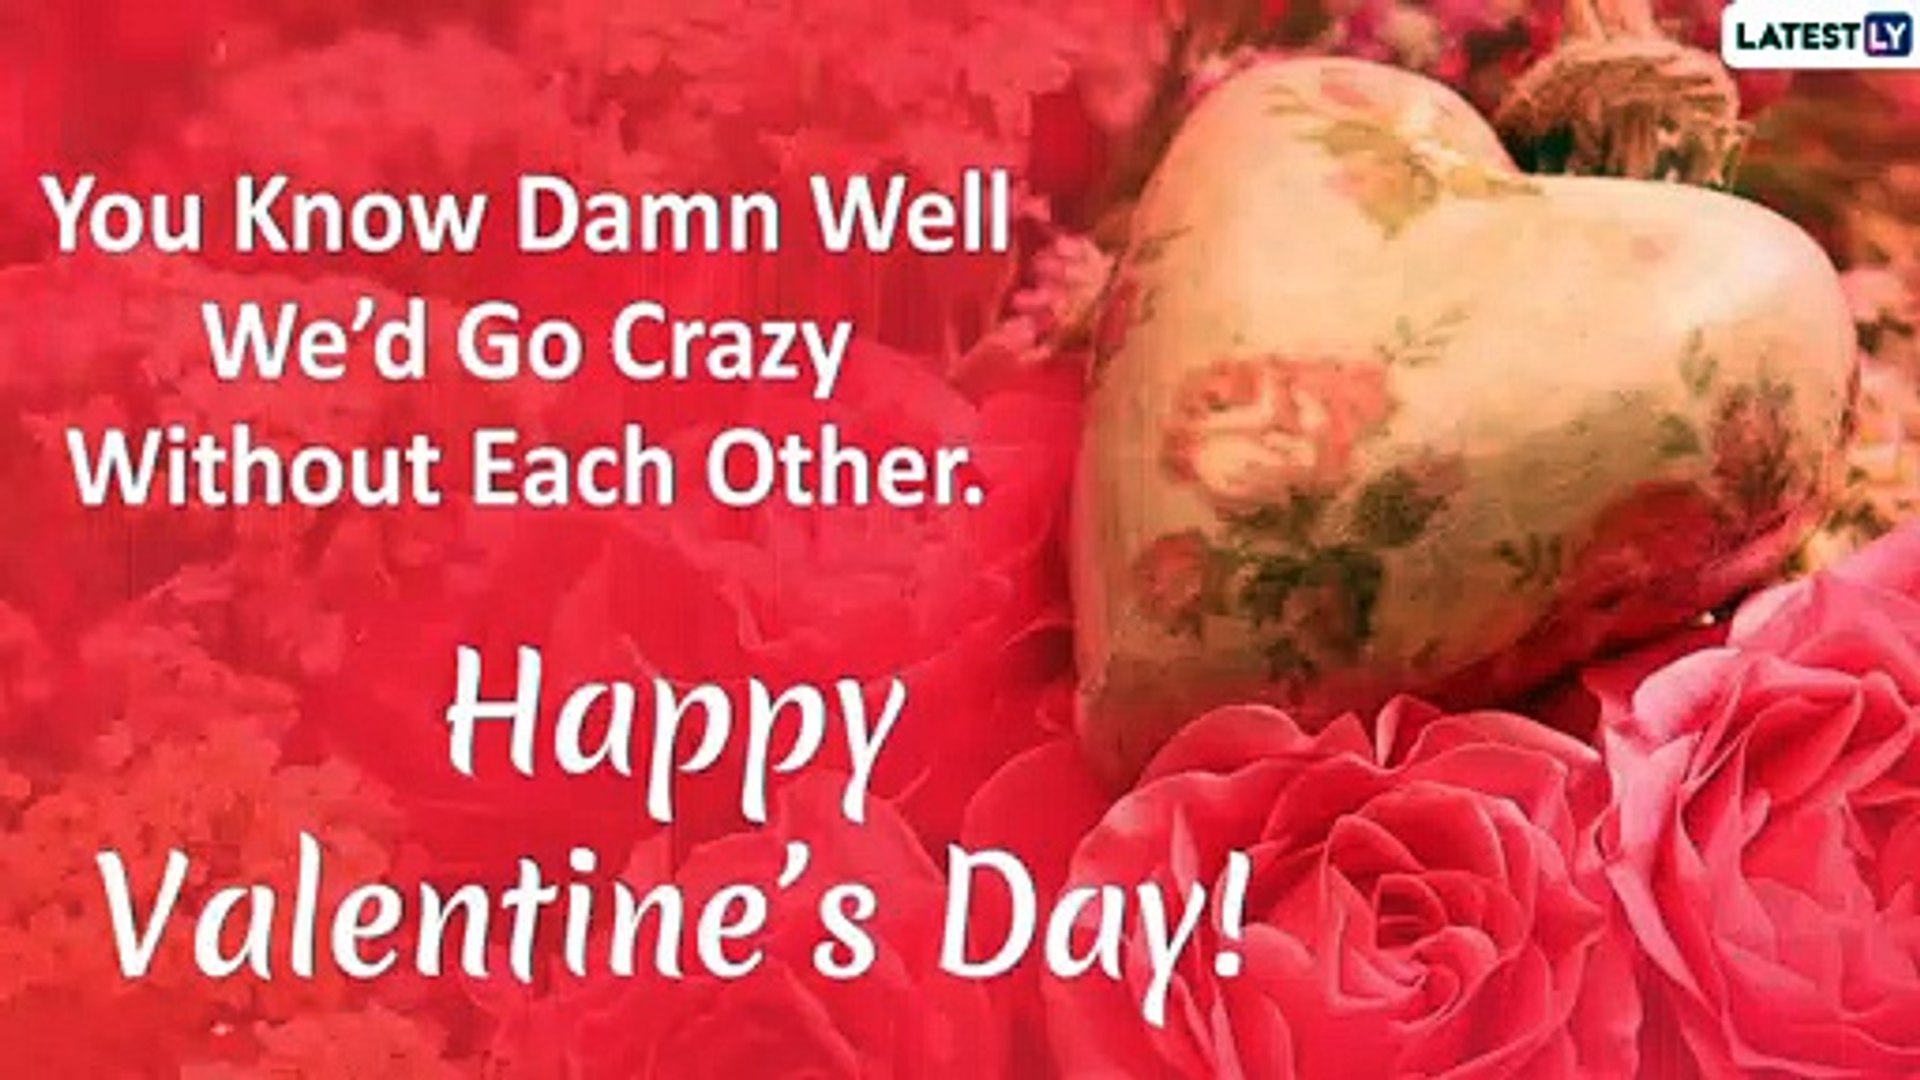 Happy Valentines Day 2020 Wishes For Boyfriend: WhatsApp Messages, Images &  Quotes To Send Him - video Dailymotion